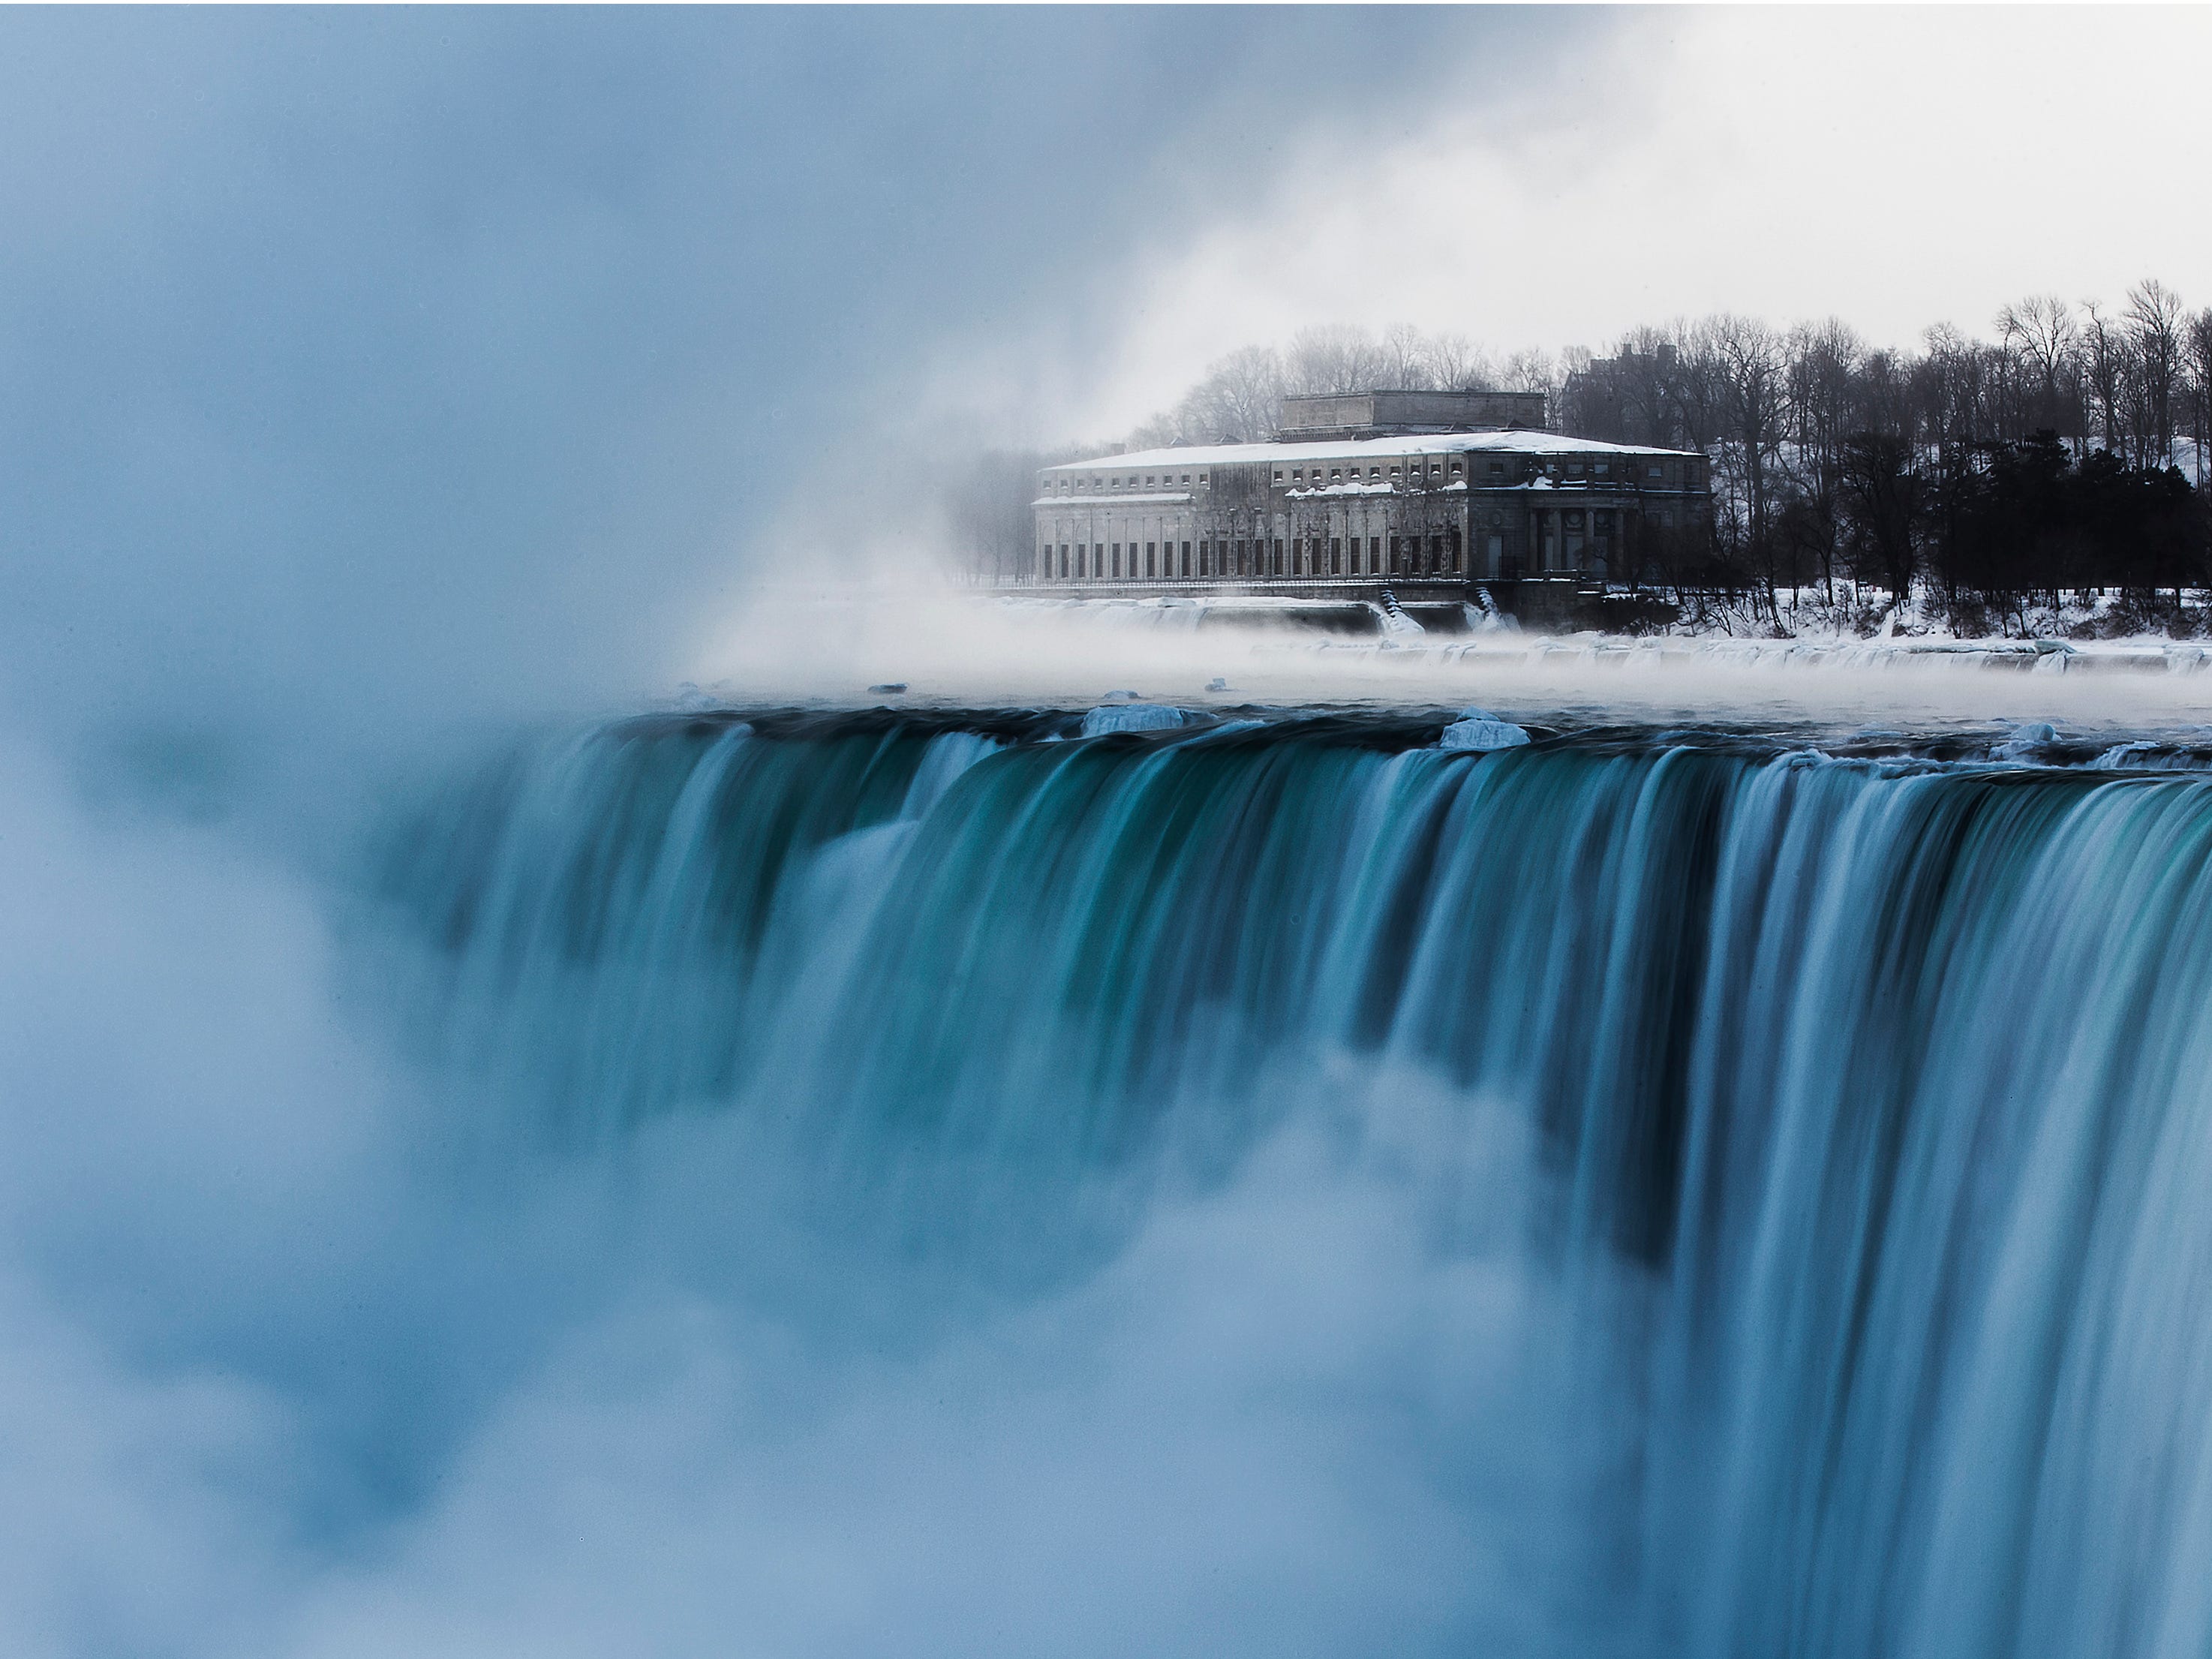 <p>The waterfall flows with <a href="https://www.niagarafallsusa.com/planning-tools/about-niagara-falls/fun-facts/">more than 700,000 gallons of water per second.</a></p><p>Niagara Falls was ranked #81 in <a href="https://www.sentiment-index.com/most-loved">Tourism Sentiment Index's 100 Most Loved Destinations Around the World</a> in 2023.</p>